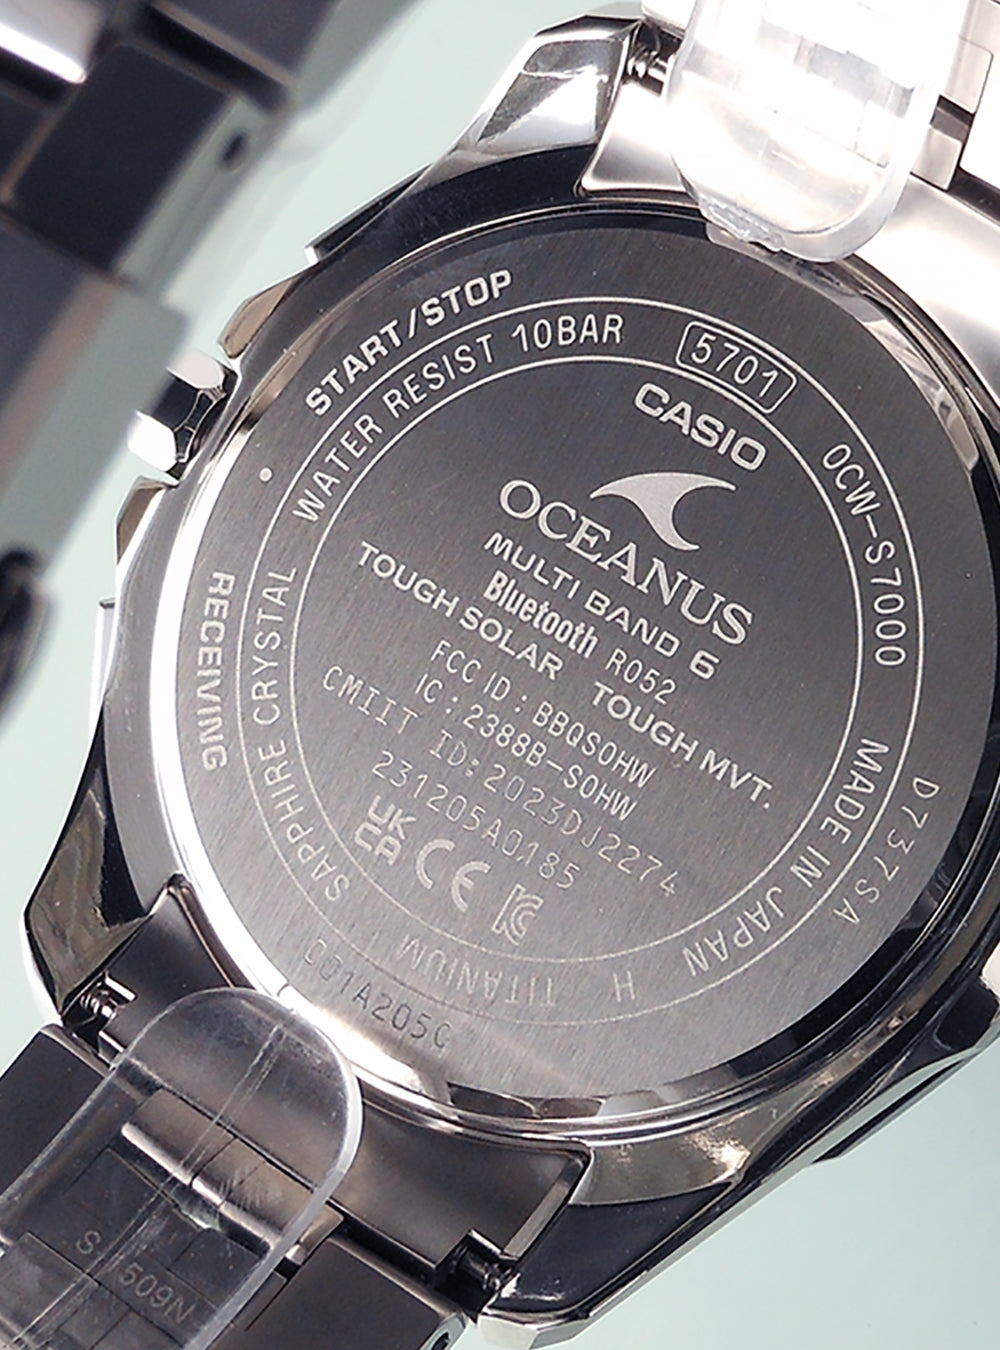 CASIO WATCH OCEANUS MANTA S7000 SERIES OCW-S7000C-2AJF LIMITED EDITION MADE IN JAPAN JDM